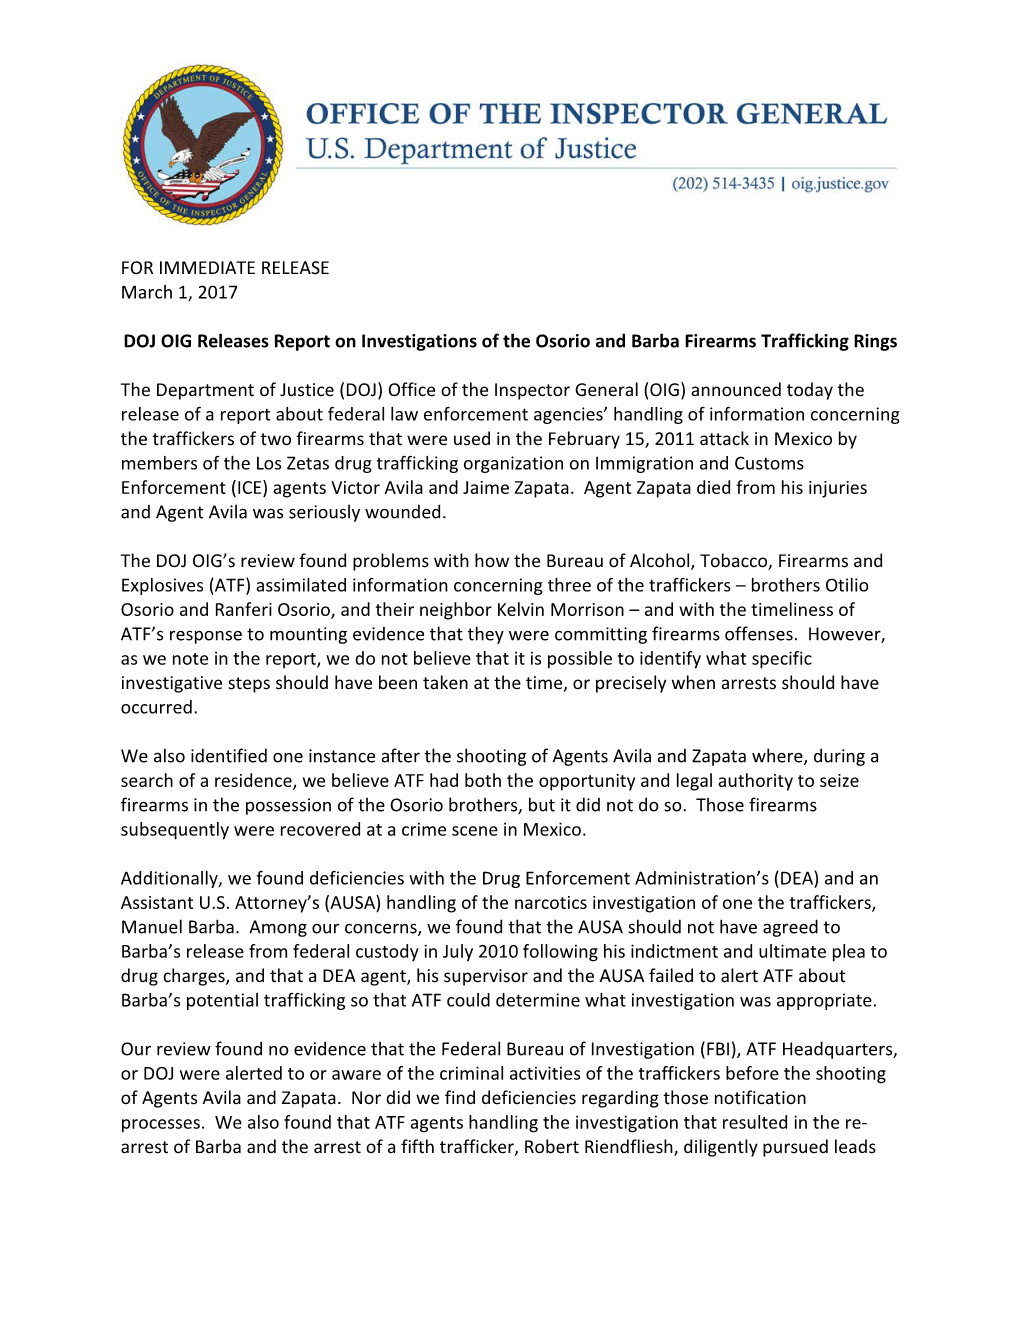 DOJ OIG Releases Report on Investigations of the Osorio and Barba Firearms Trafficking Rings